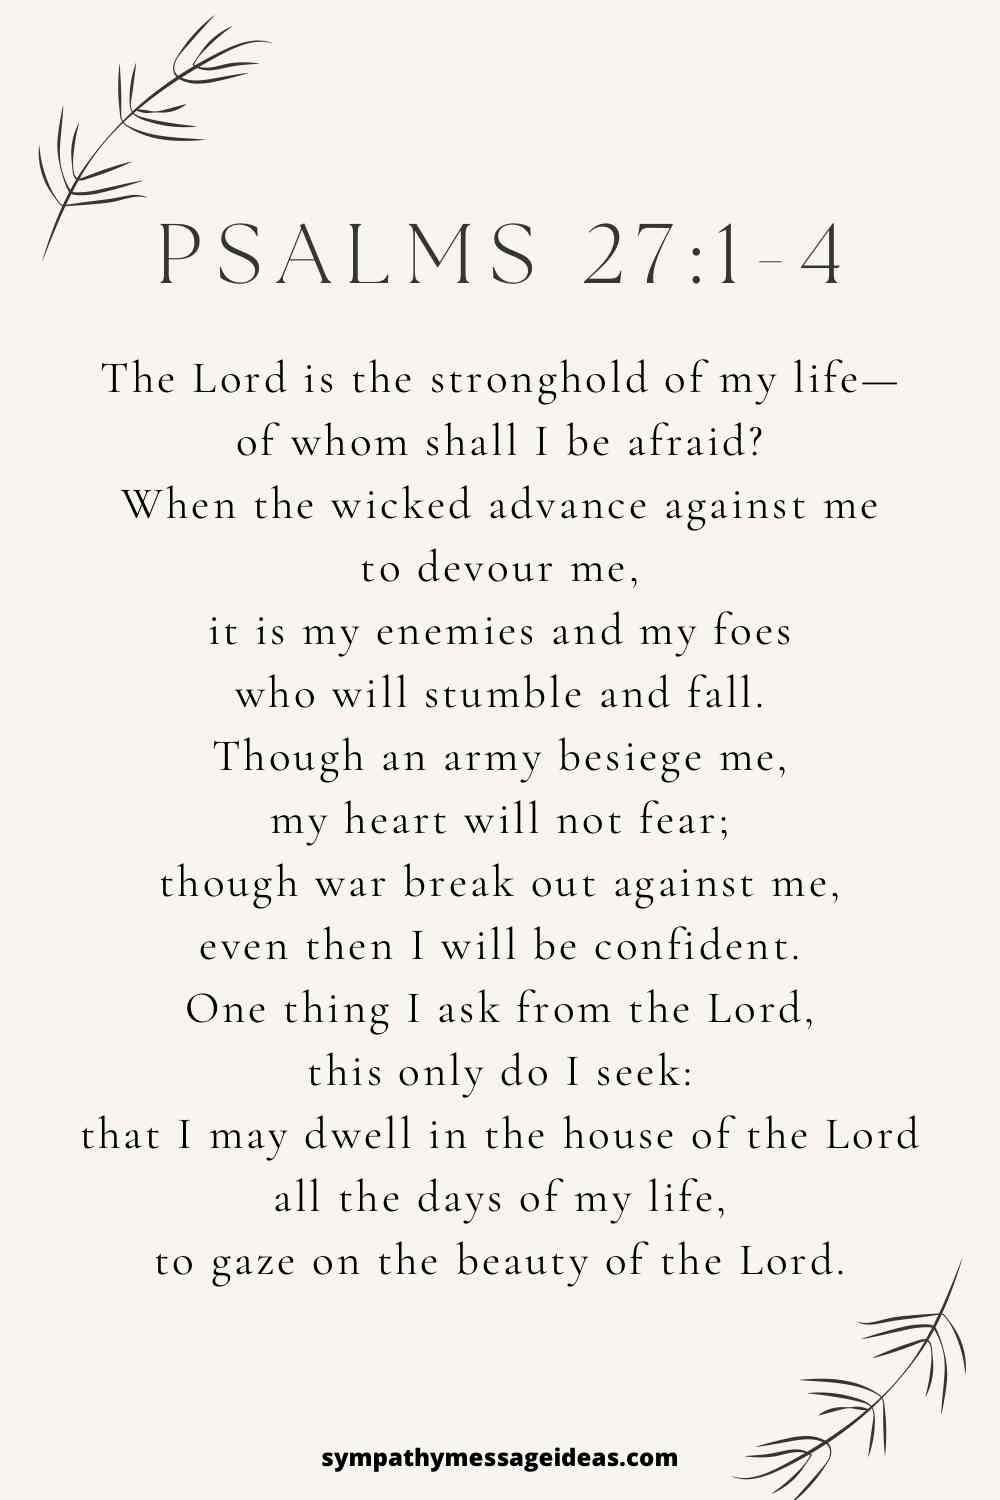 psalms 27:1-4 funeral reading